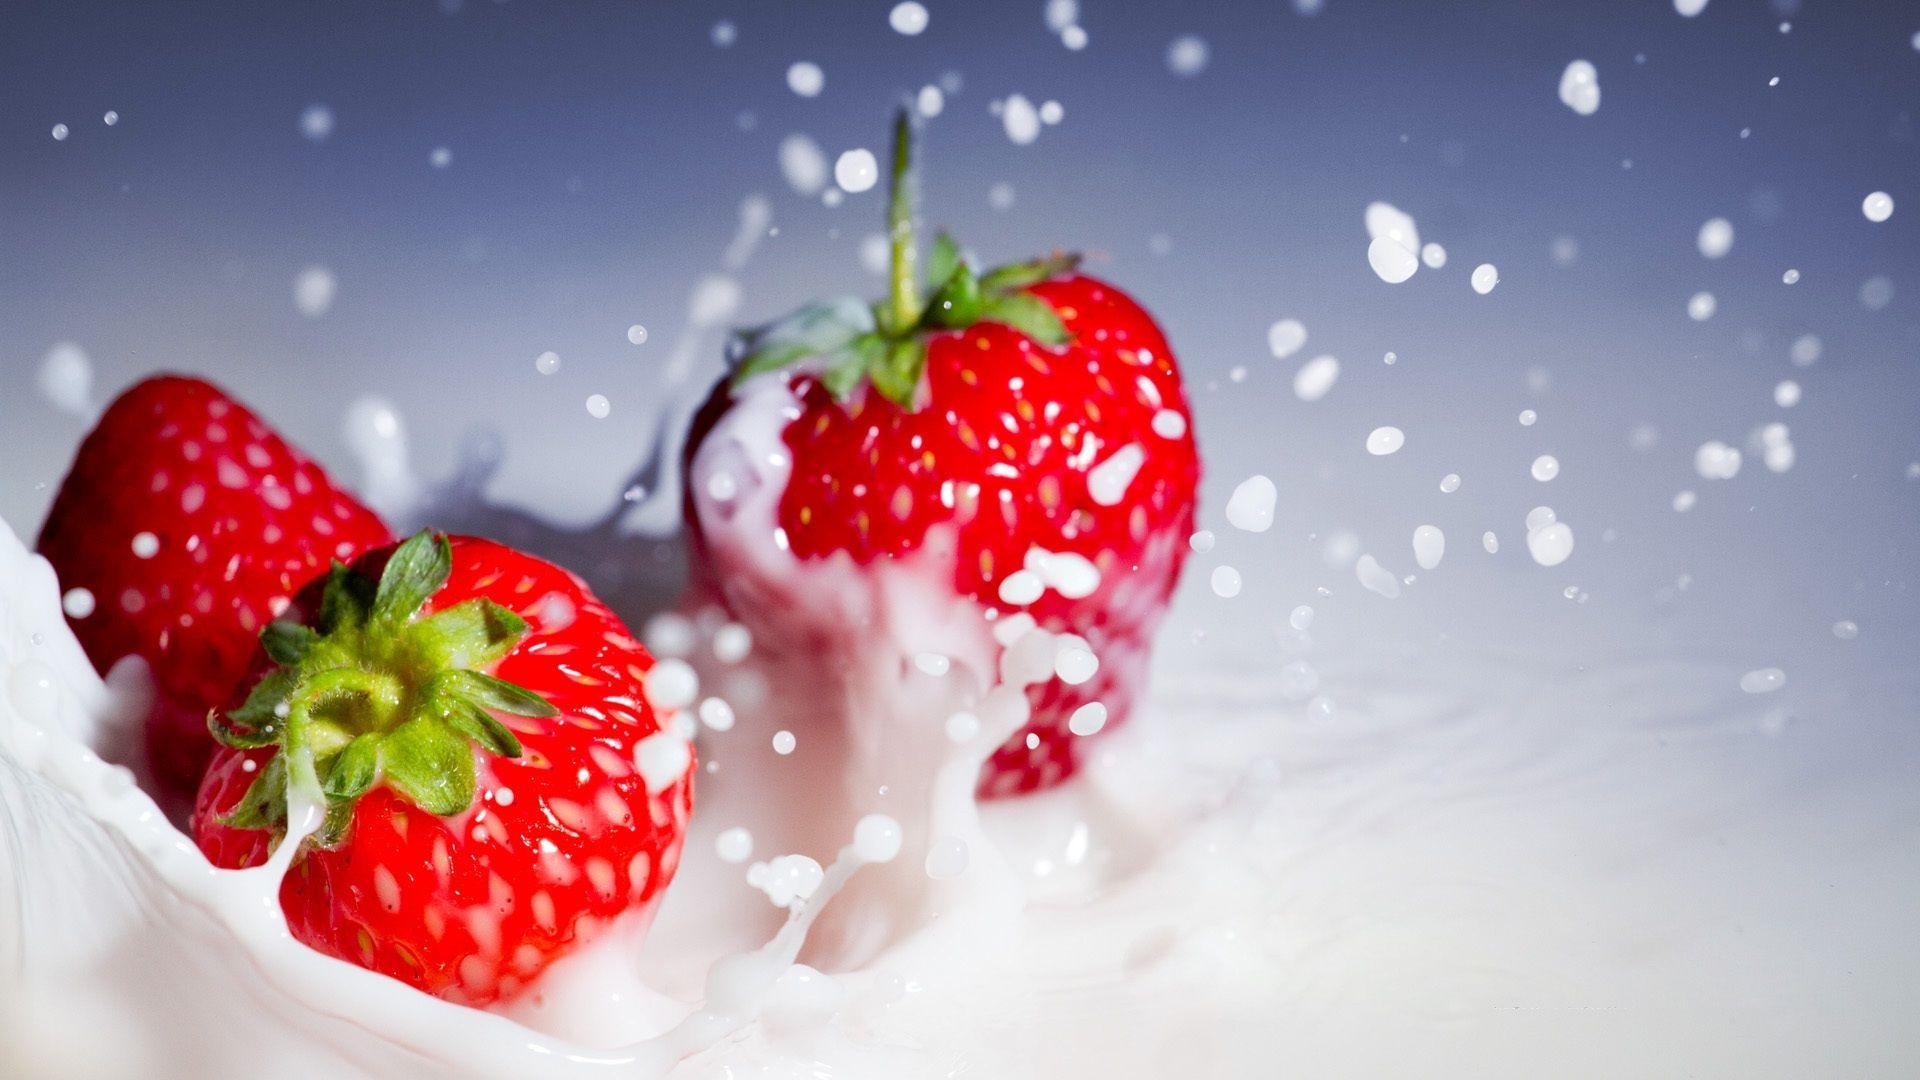 Strawberry: June-bearing plants are the most common type, Food. 1920x1080 Full HD Background.